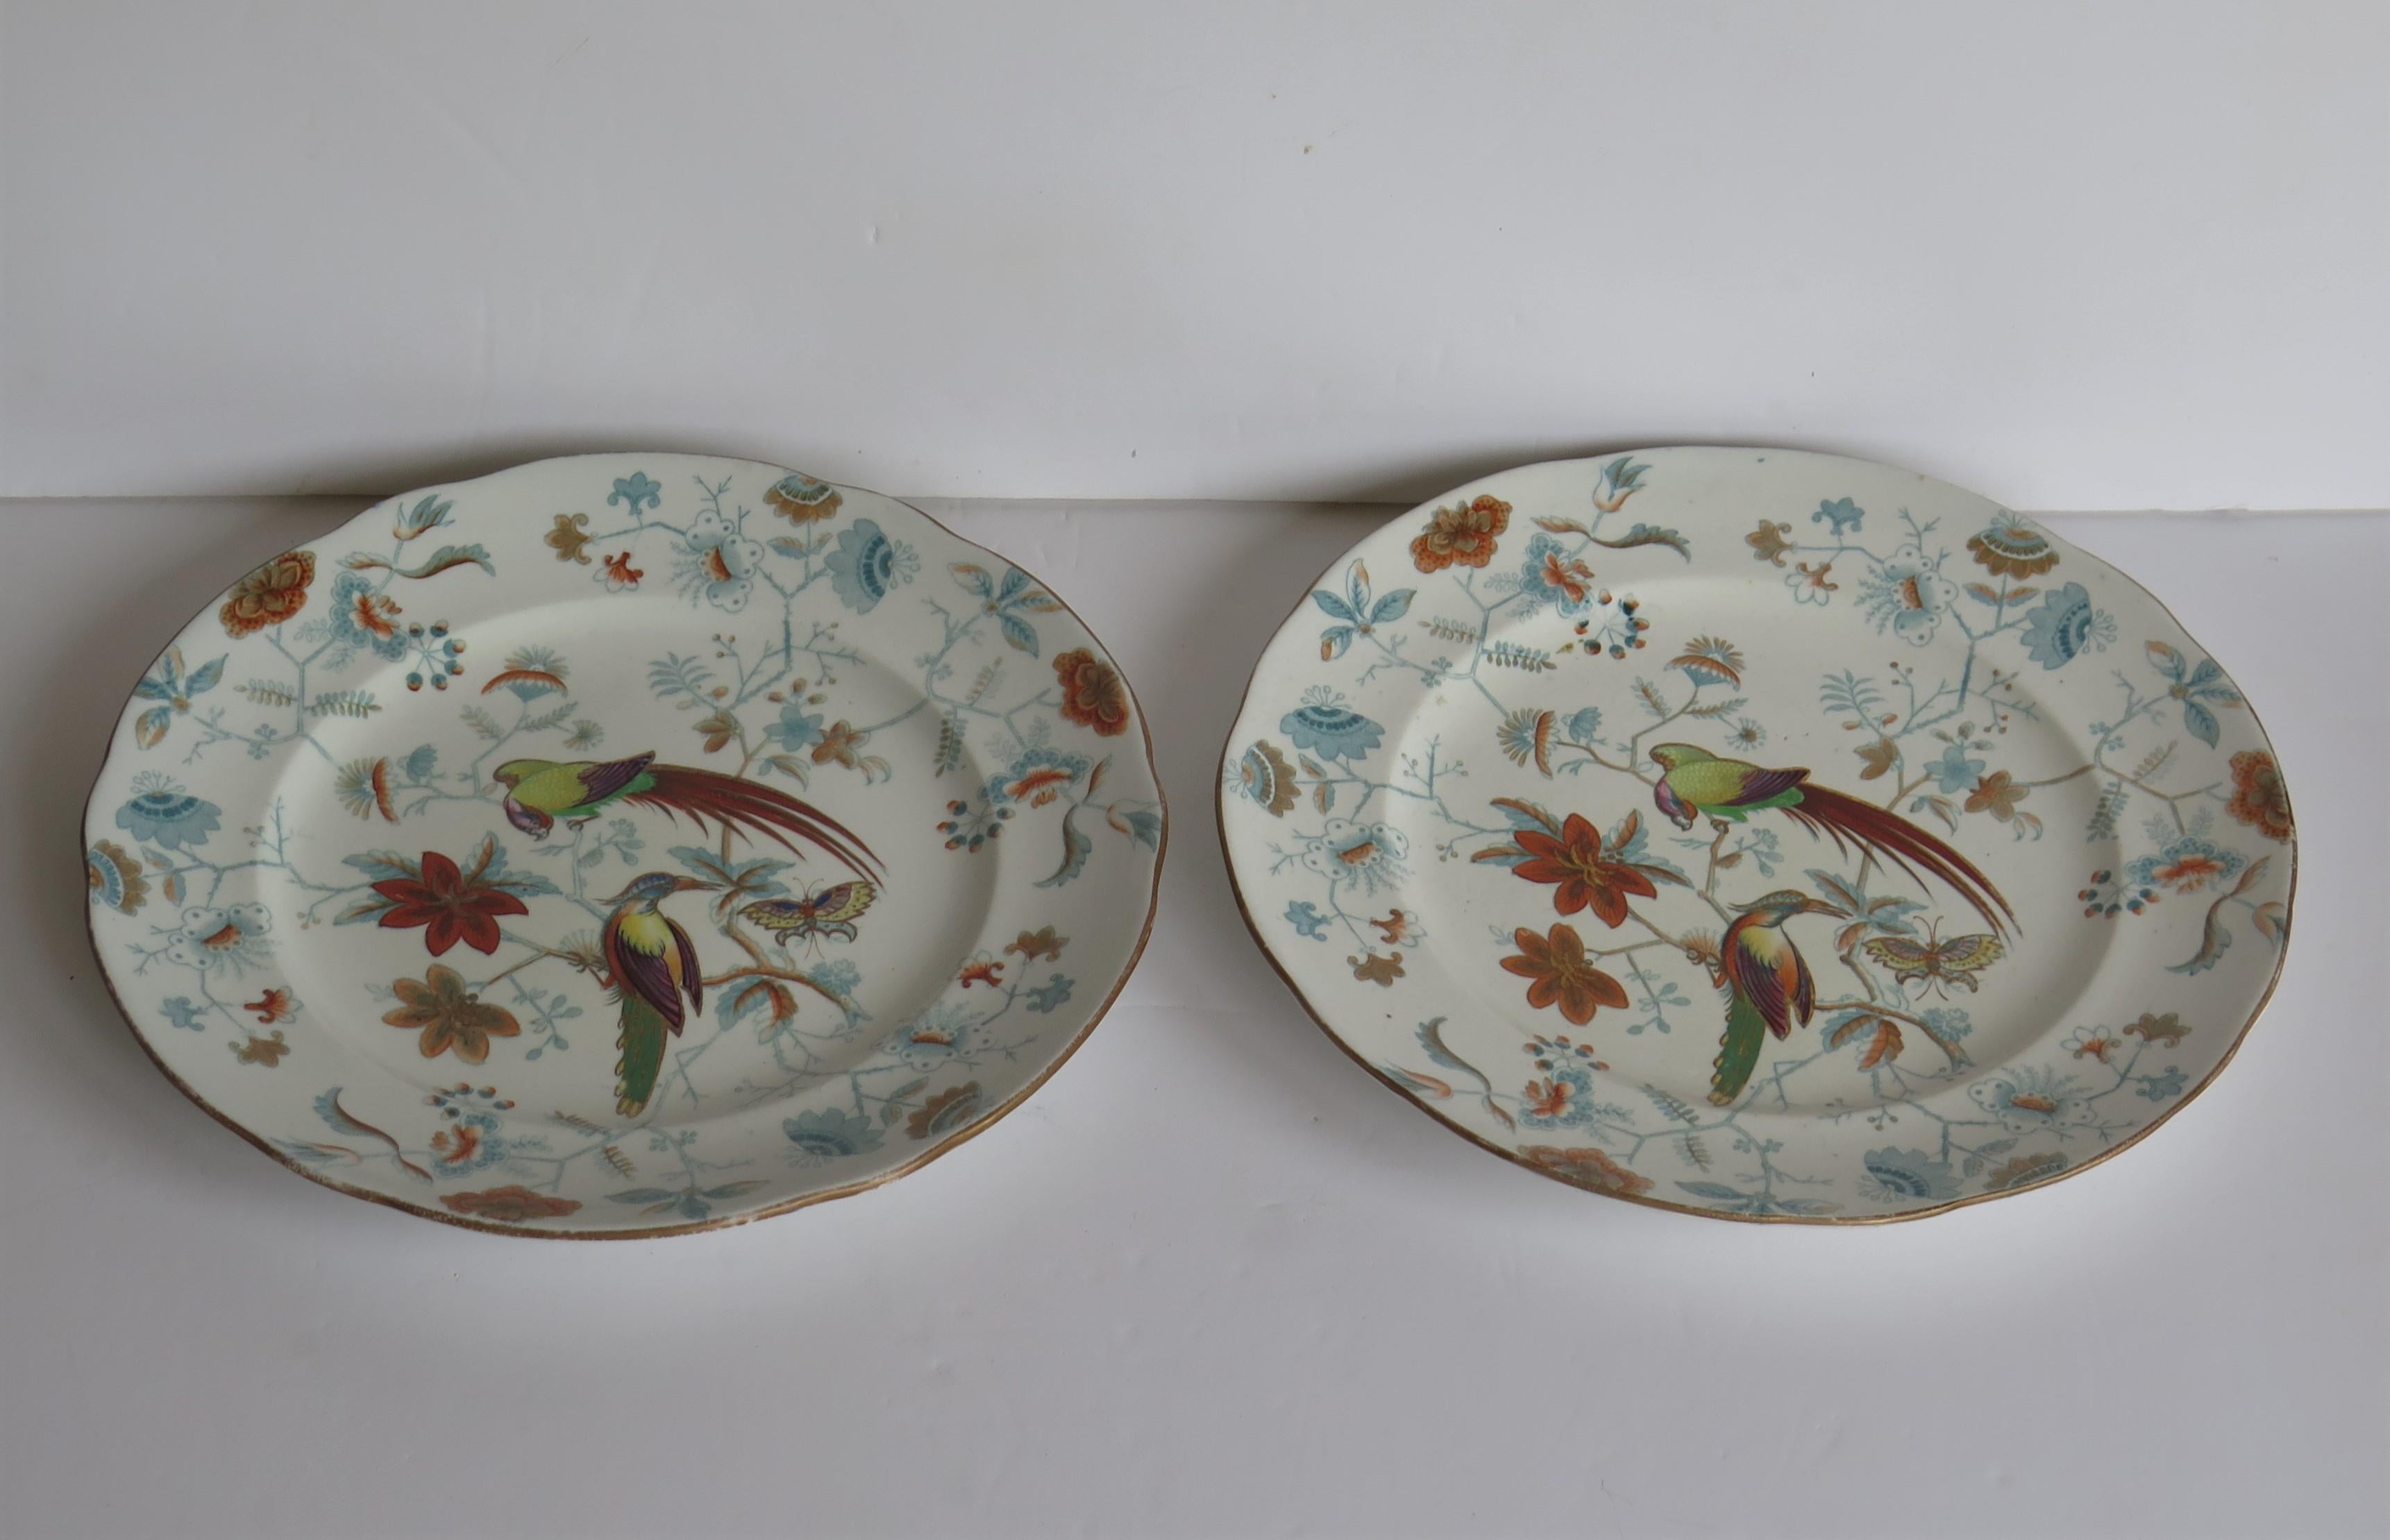 These are a very good, late Georgian pair of Ironstone Desert plates decorated in a rare pattern No.85, manufactured by the English Davenport factory, which was situated in Longport, Staffordshire, England and dating to Circa 1820.

Both plates